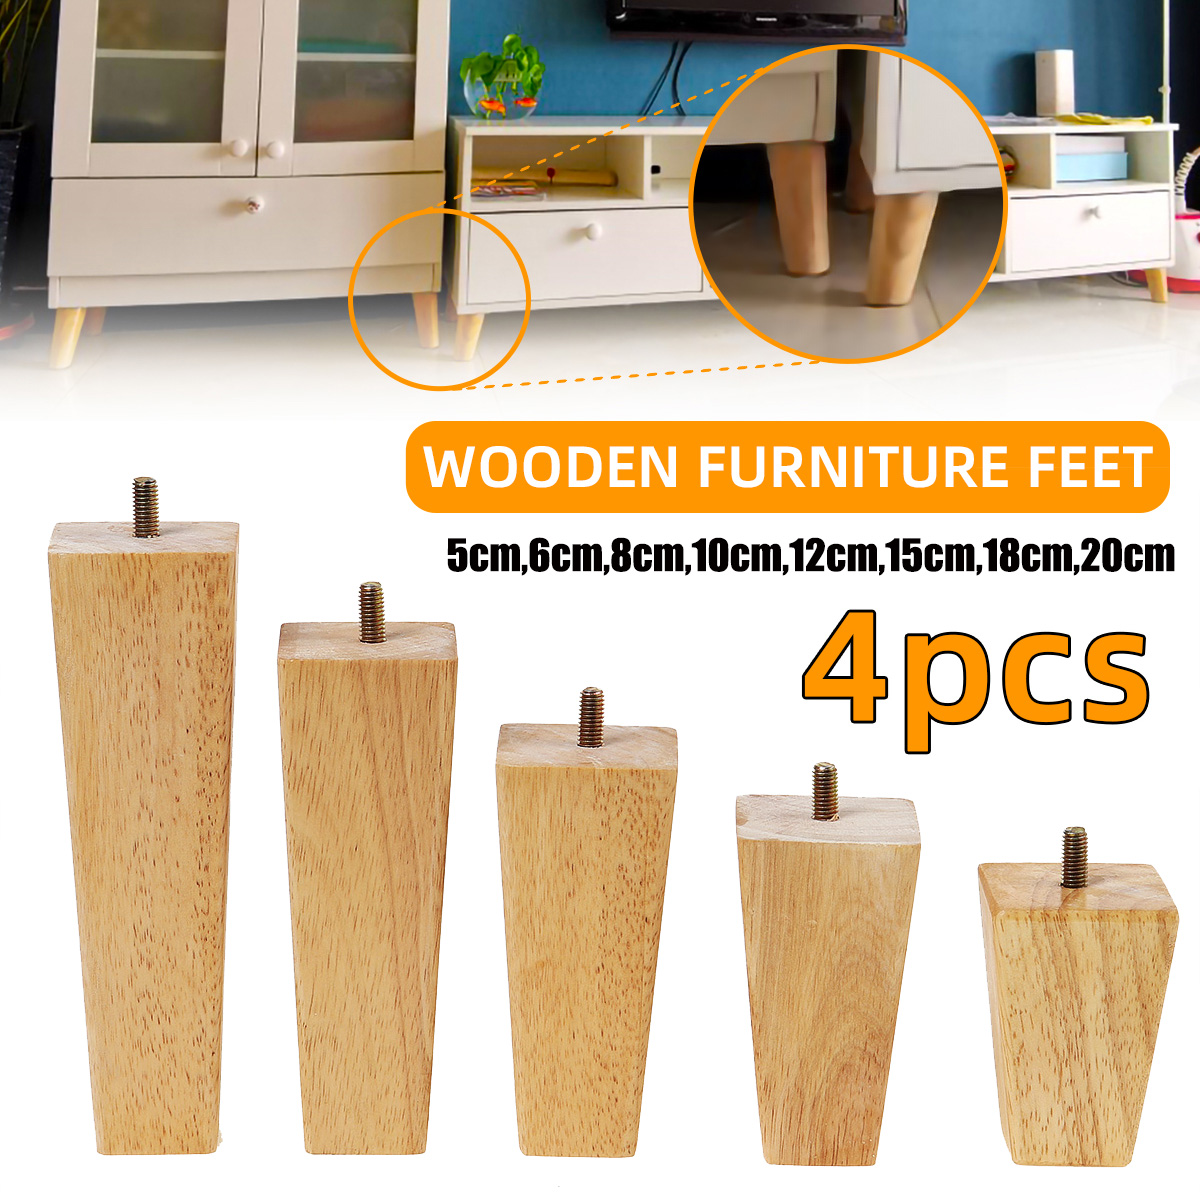 4pcs-Square-Inclined-Wooden-Furniture-Feets-Legs-Set-For-Sofa-Cabinets-Table-1772609-1